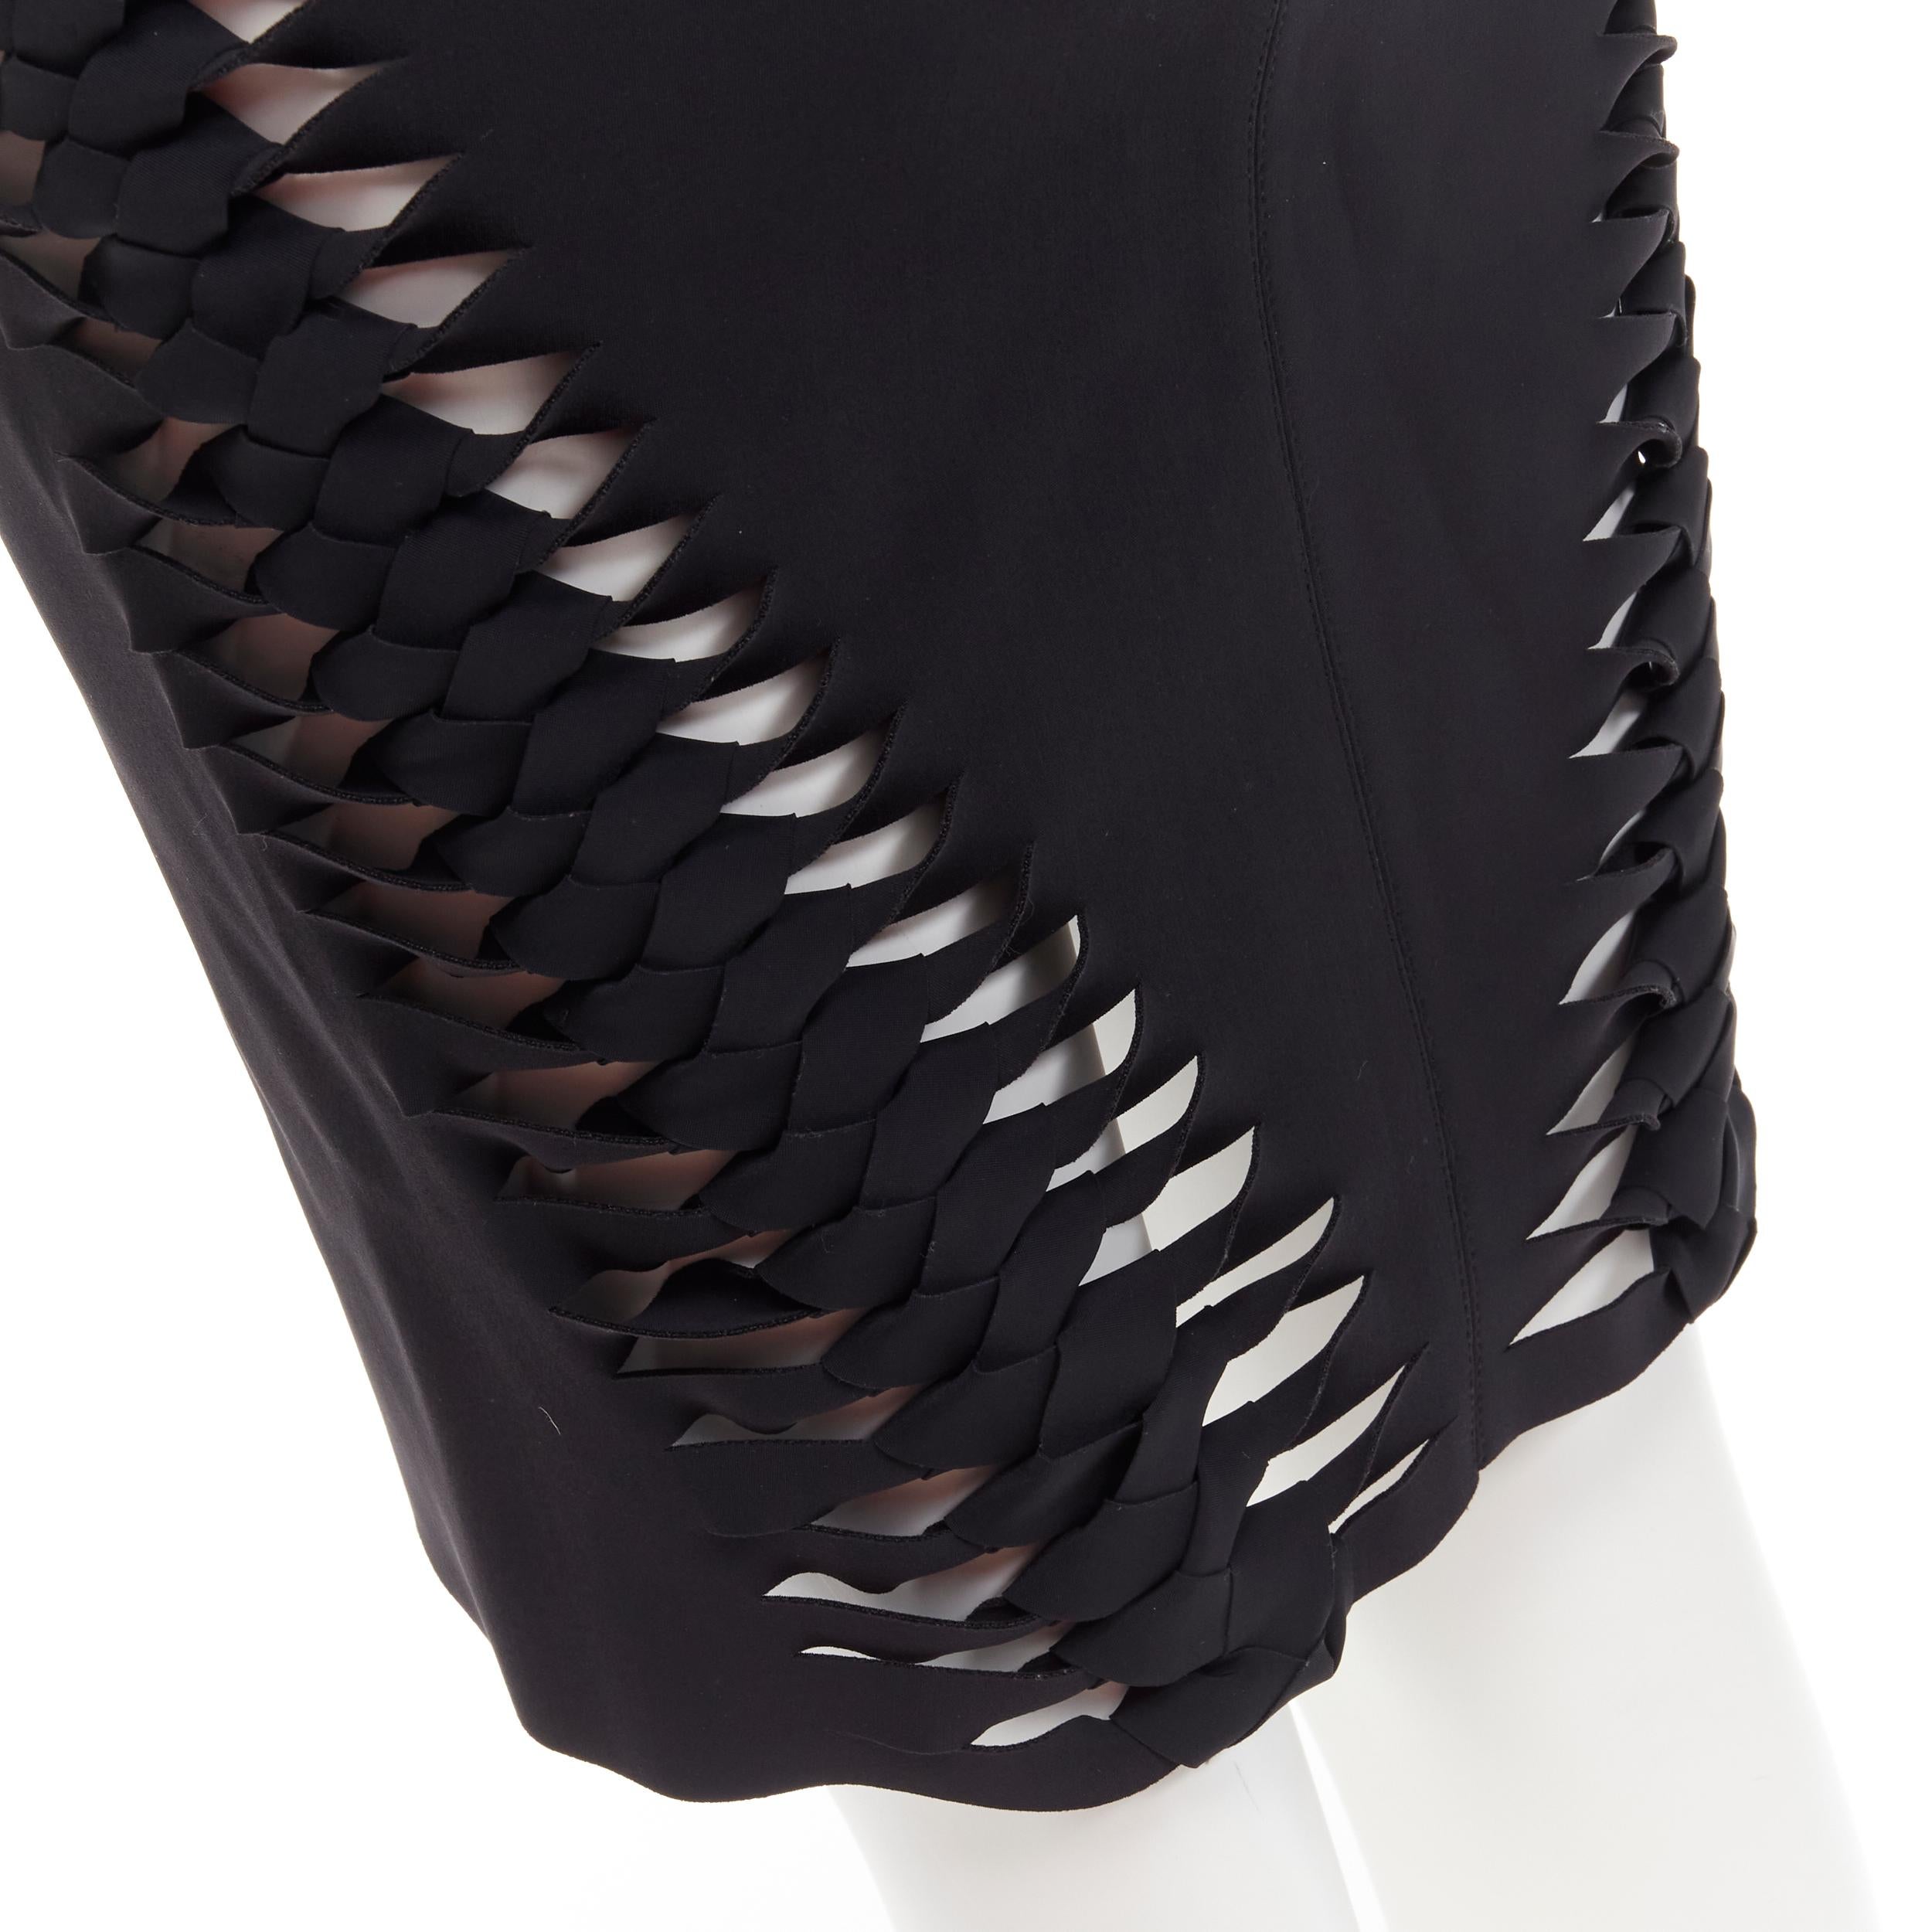 DION LEE black cut out braid knot detail pencil skirt AUS8 US4 S
Brand: Dion Lee
Material: Polyester
Color: Black
Pattern: Solid
Closure: Zip
Extra Detail: Braid detailing at back.
Made in: Australia

CONDITION:
Condition: Excellent, this item was